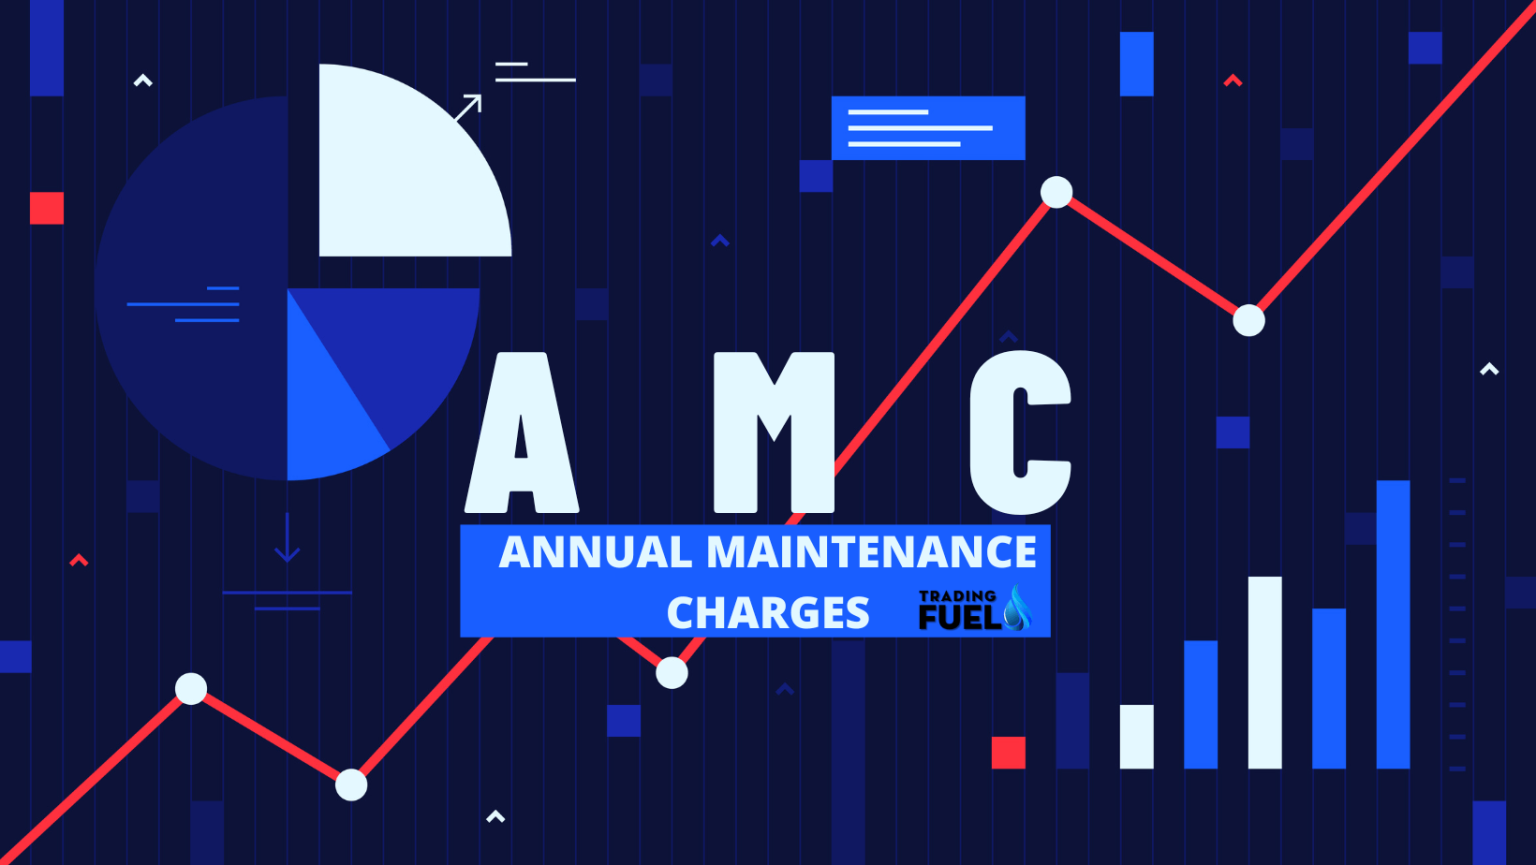 Annual Maintenance Charges (AMC) Trading Fuel